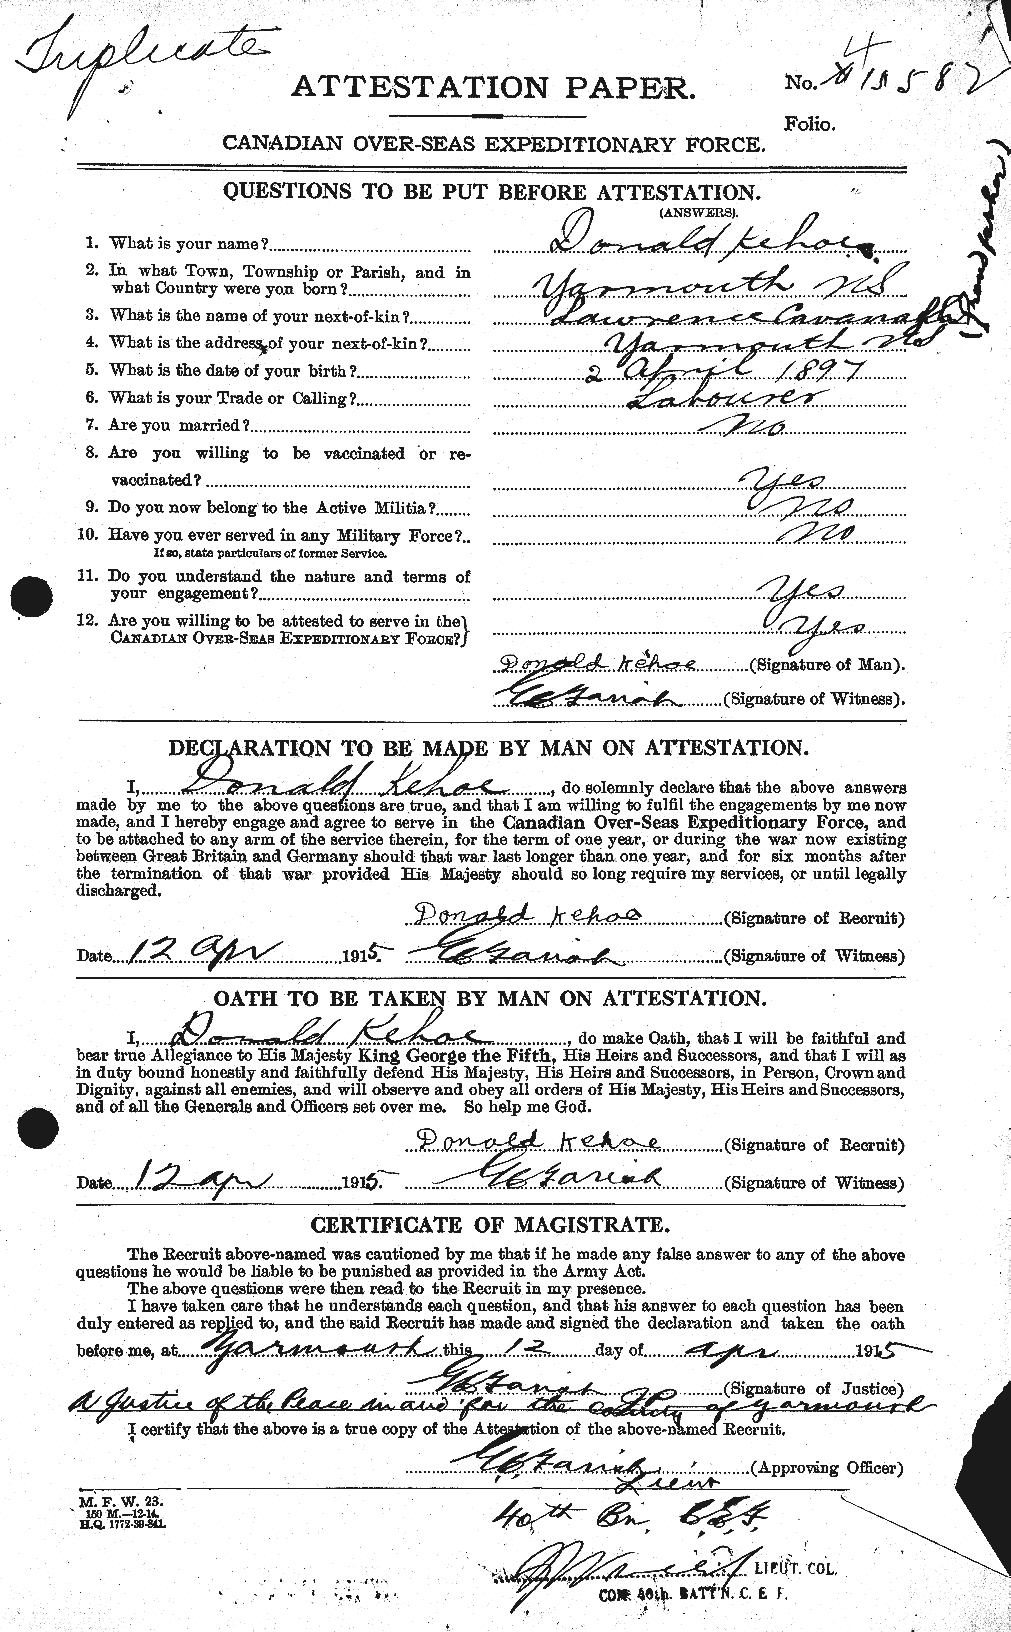 Personnel Records of the First World War - CEF 430367a